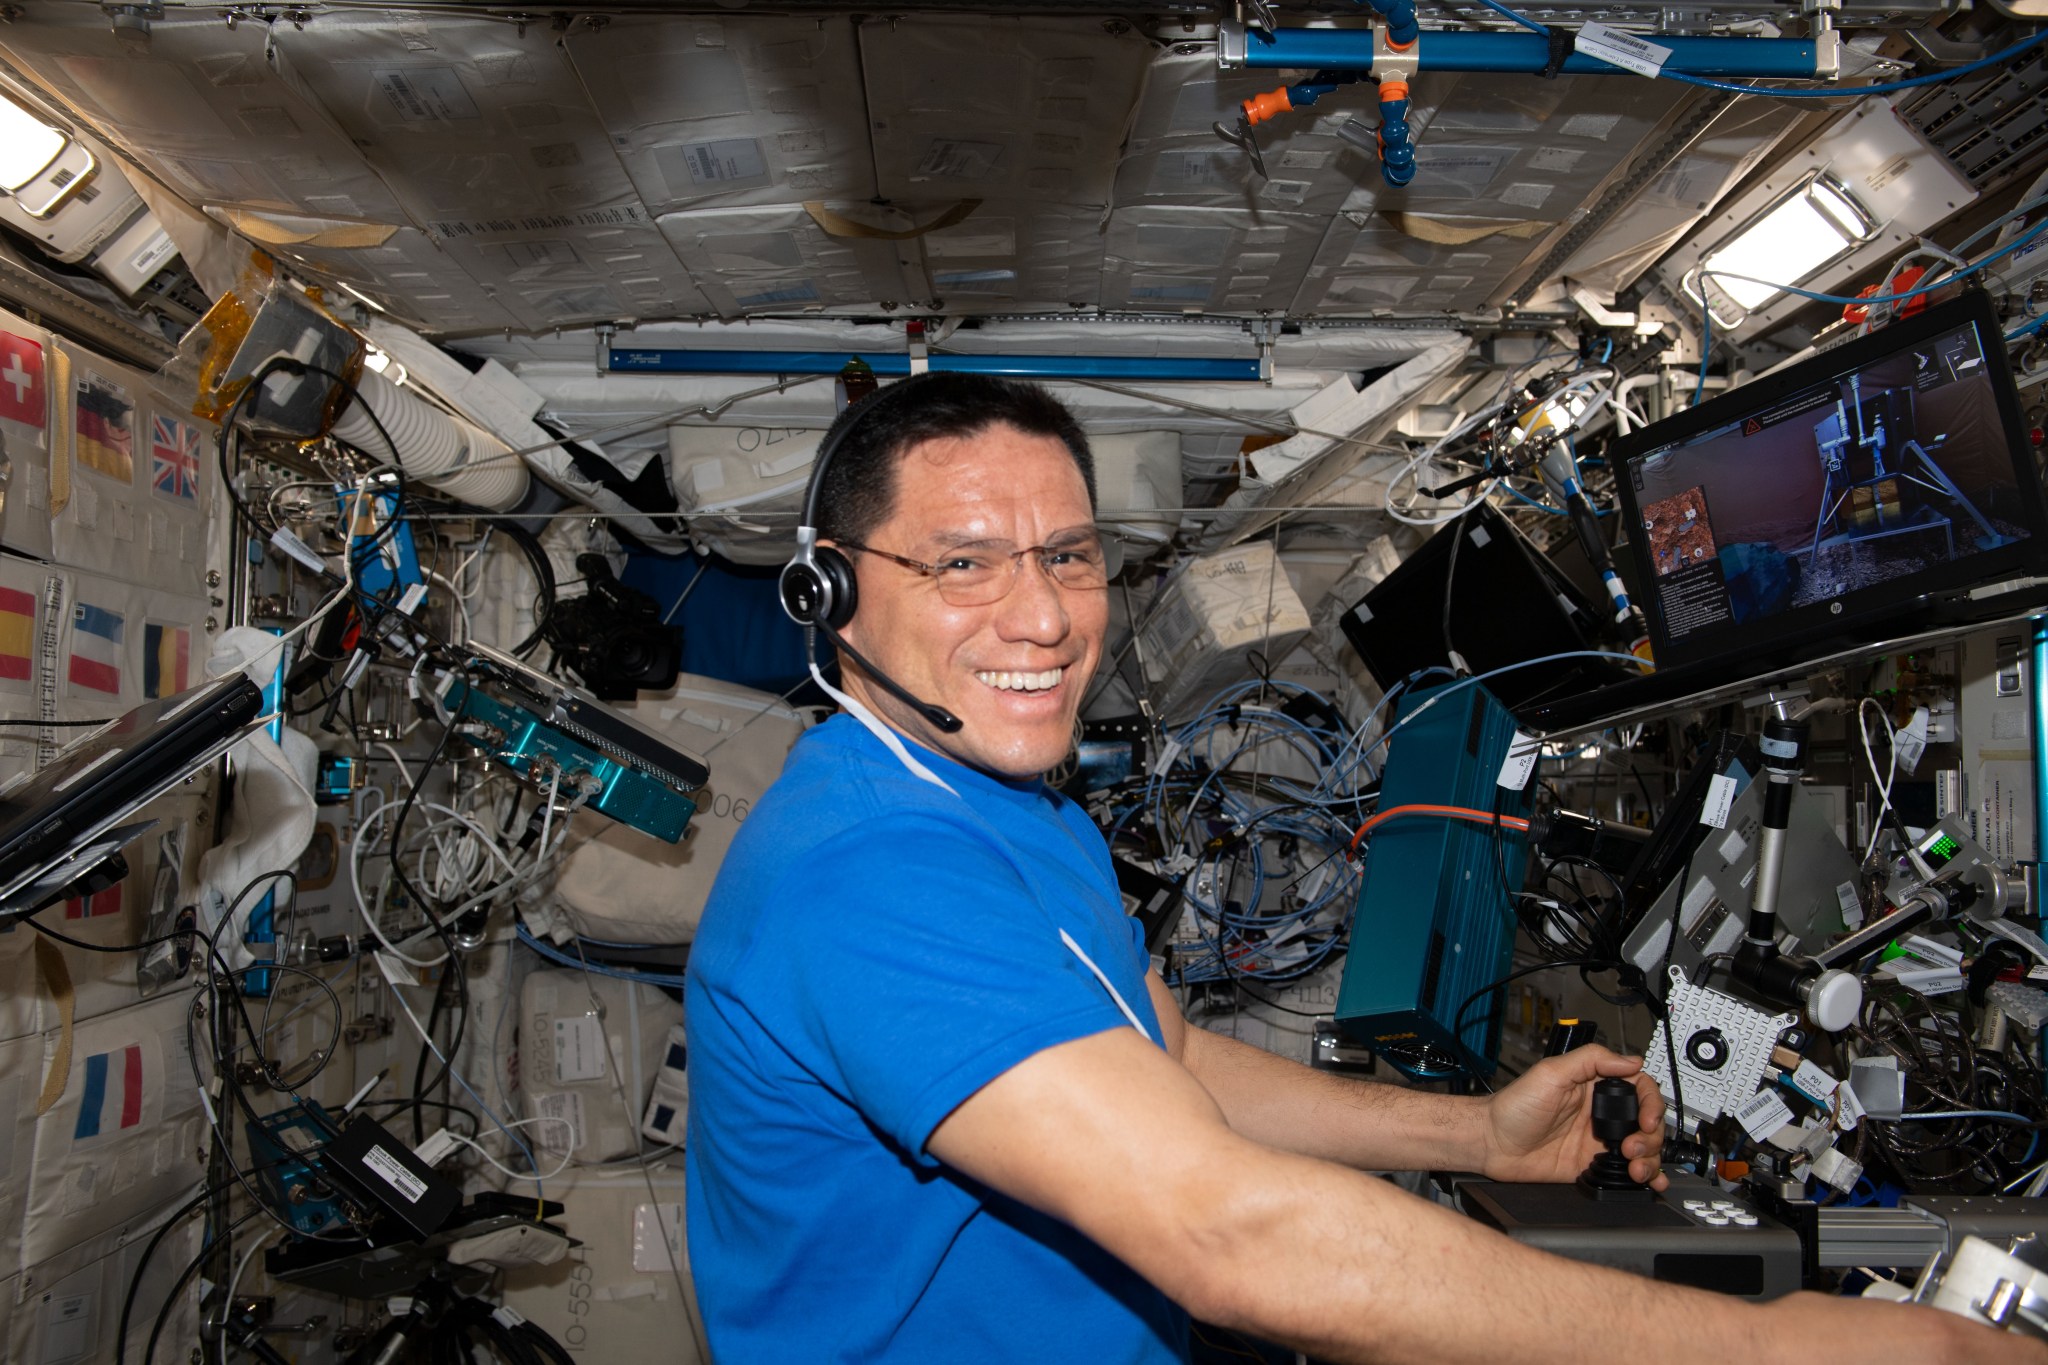 Expedition 69 Flight Engineer Frank Rubio completes a Surface Avatar session in the Columbus Laboratory Module. Surface Avatar investigates how haptic controls, user interfaces and virtual reality could command and control surface-bound robots from long distances.